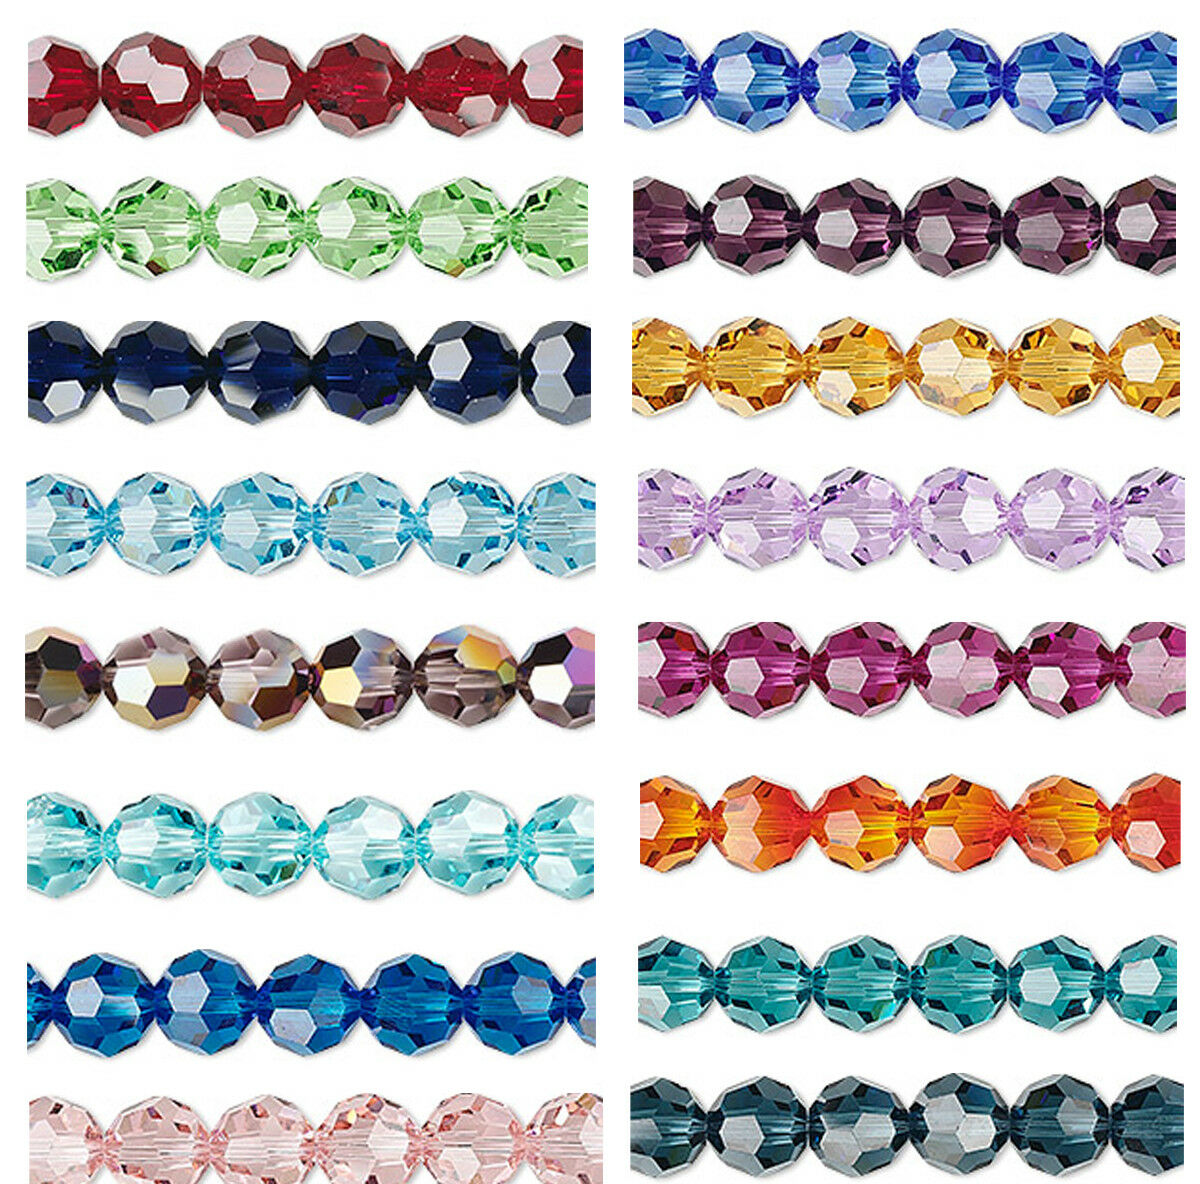 6 Swarovski Crystal Faceted Round Beads Style 5000 Size 8mm Transparent Colors